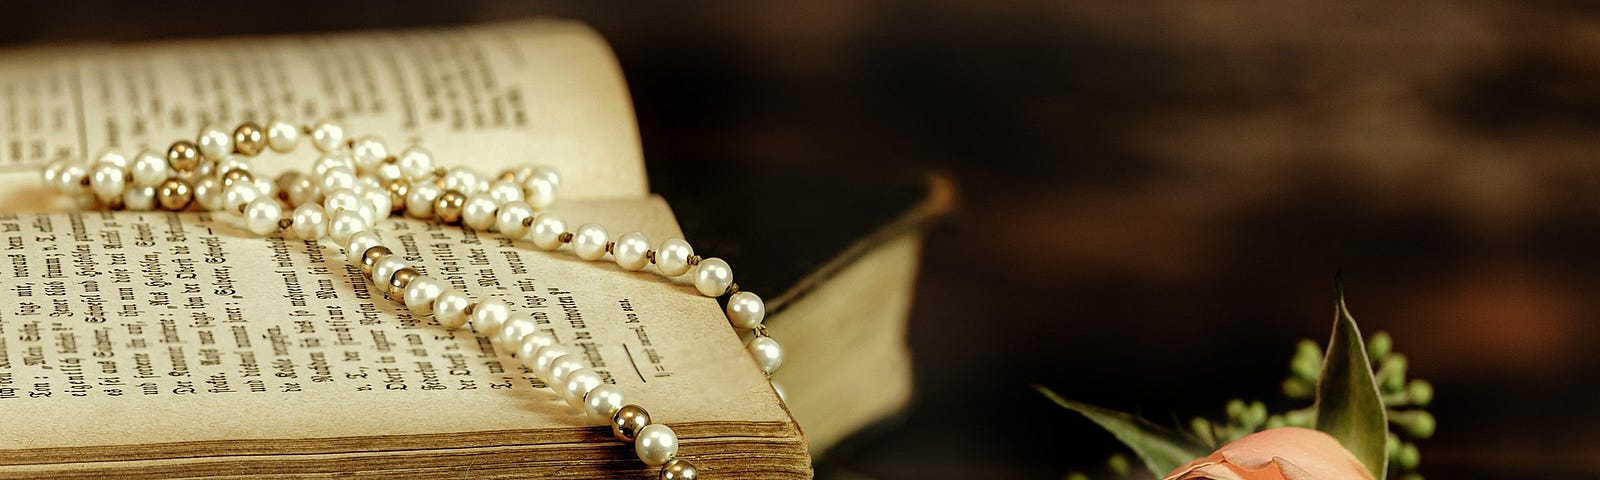 Color photo of pearl necklace draped over old book with pink rose via Pixabay